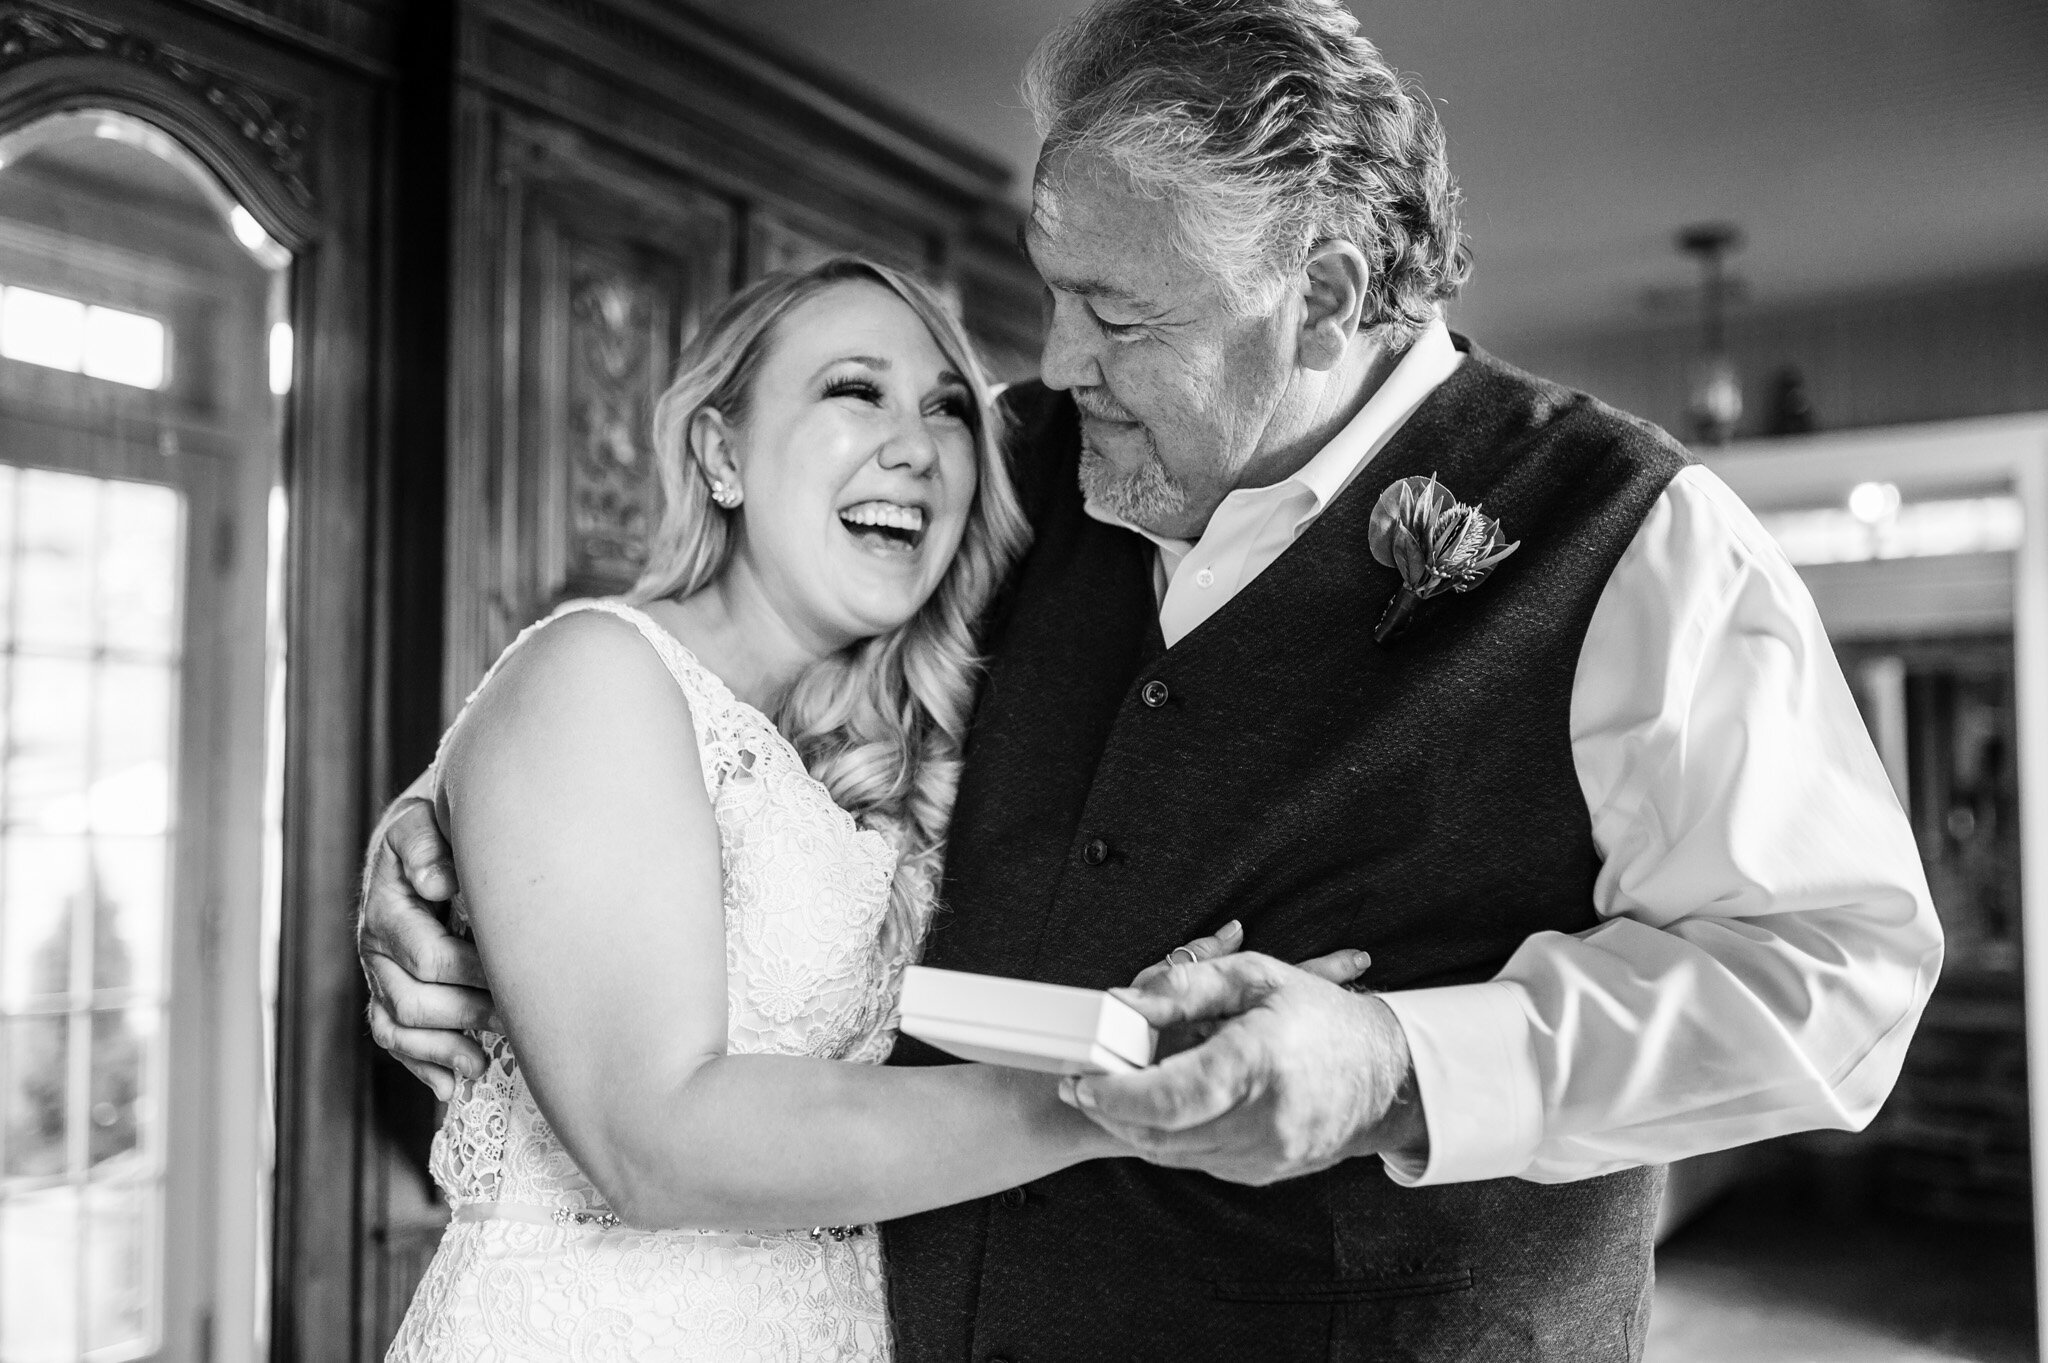 Bride and her dad sharing a moment